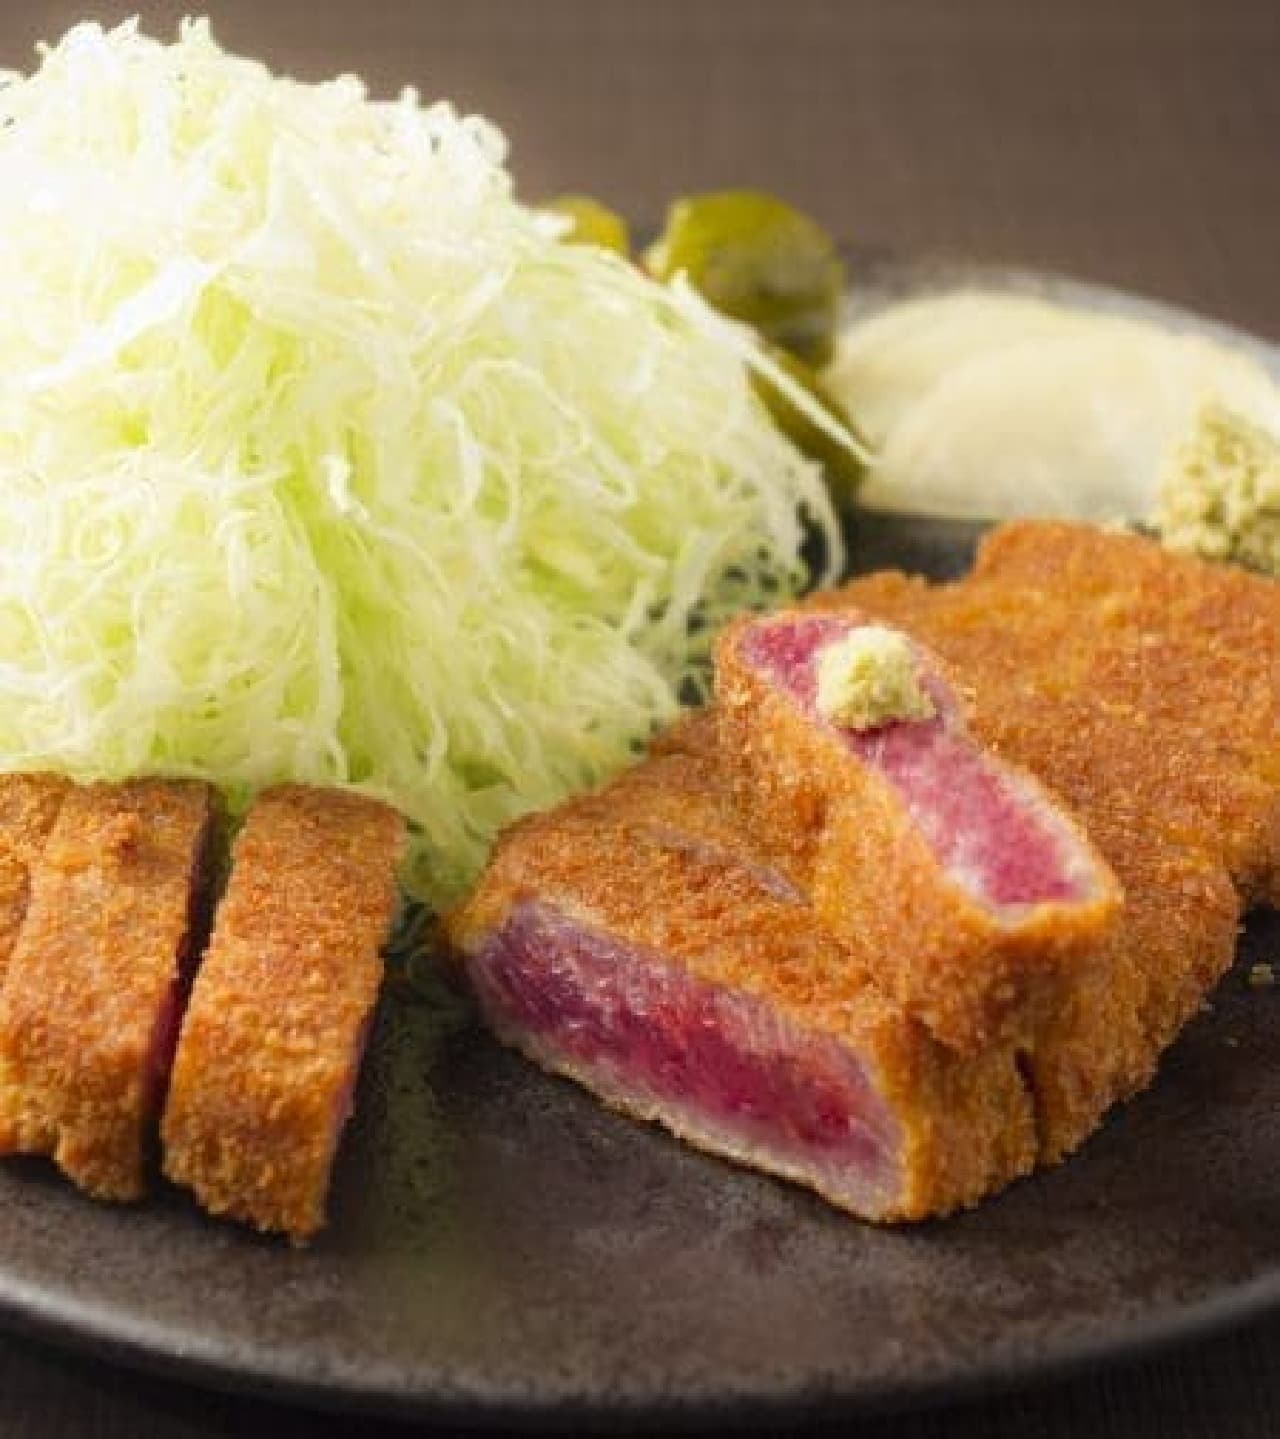 A store specializing in beef cutlets that can be lined up opens in Takebashi!